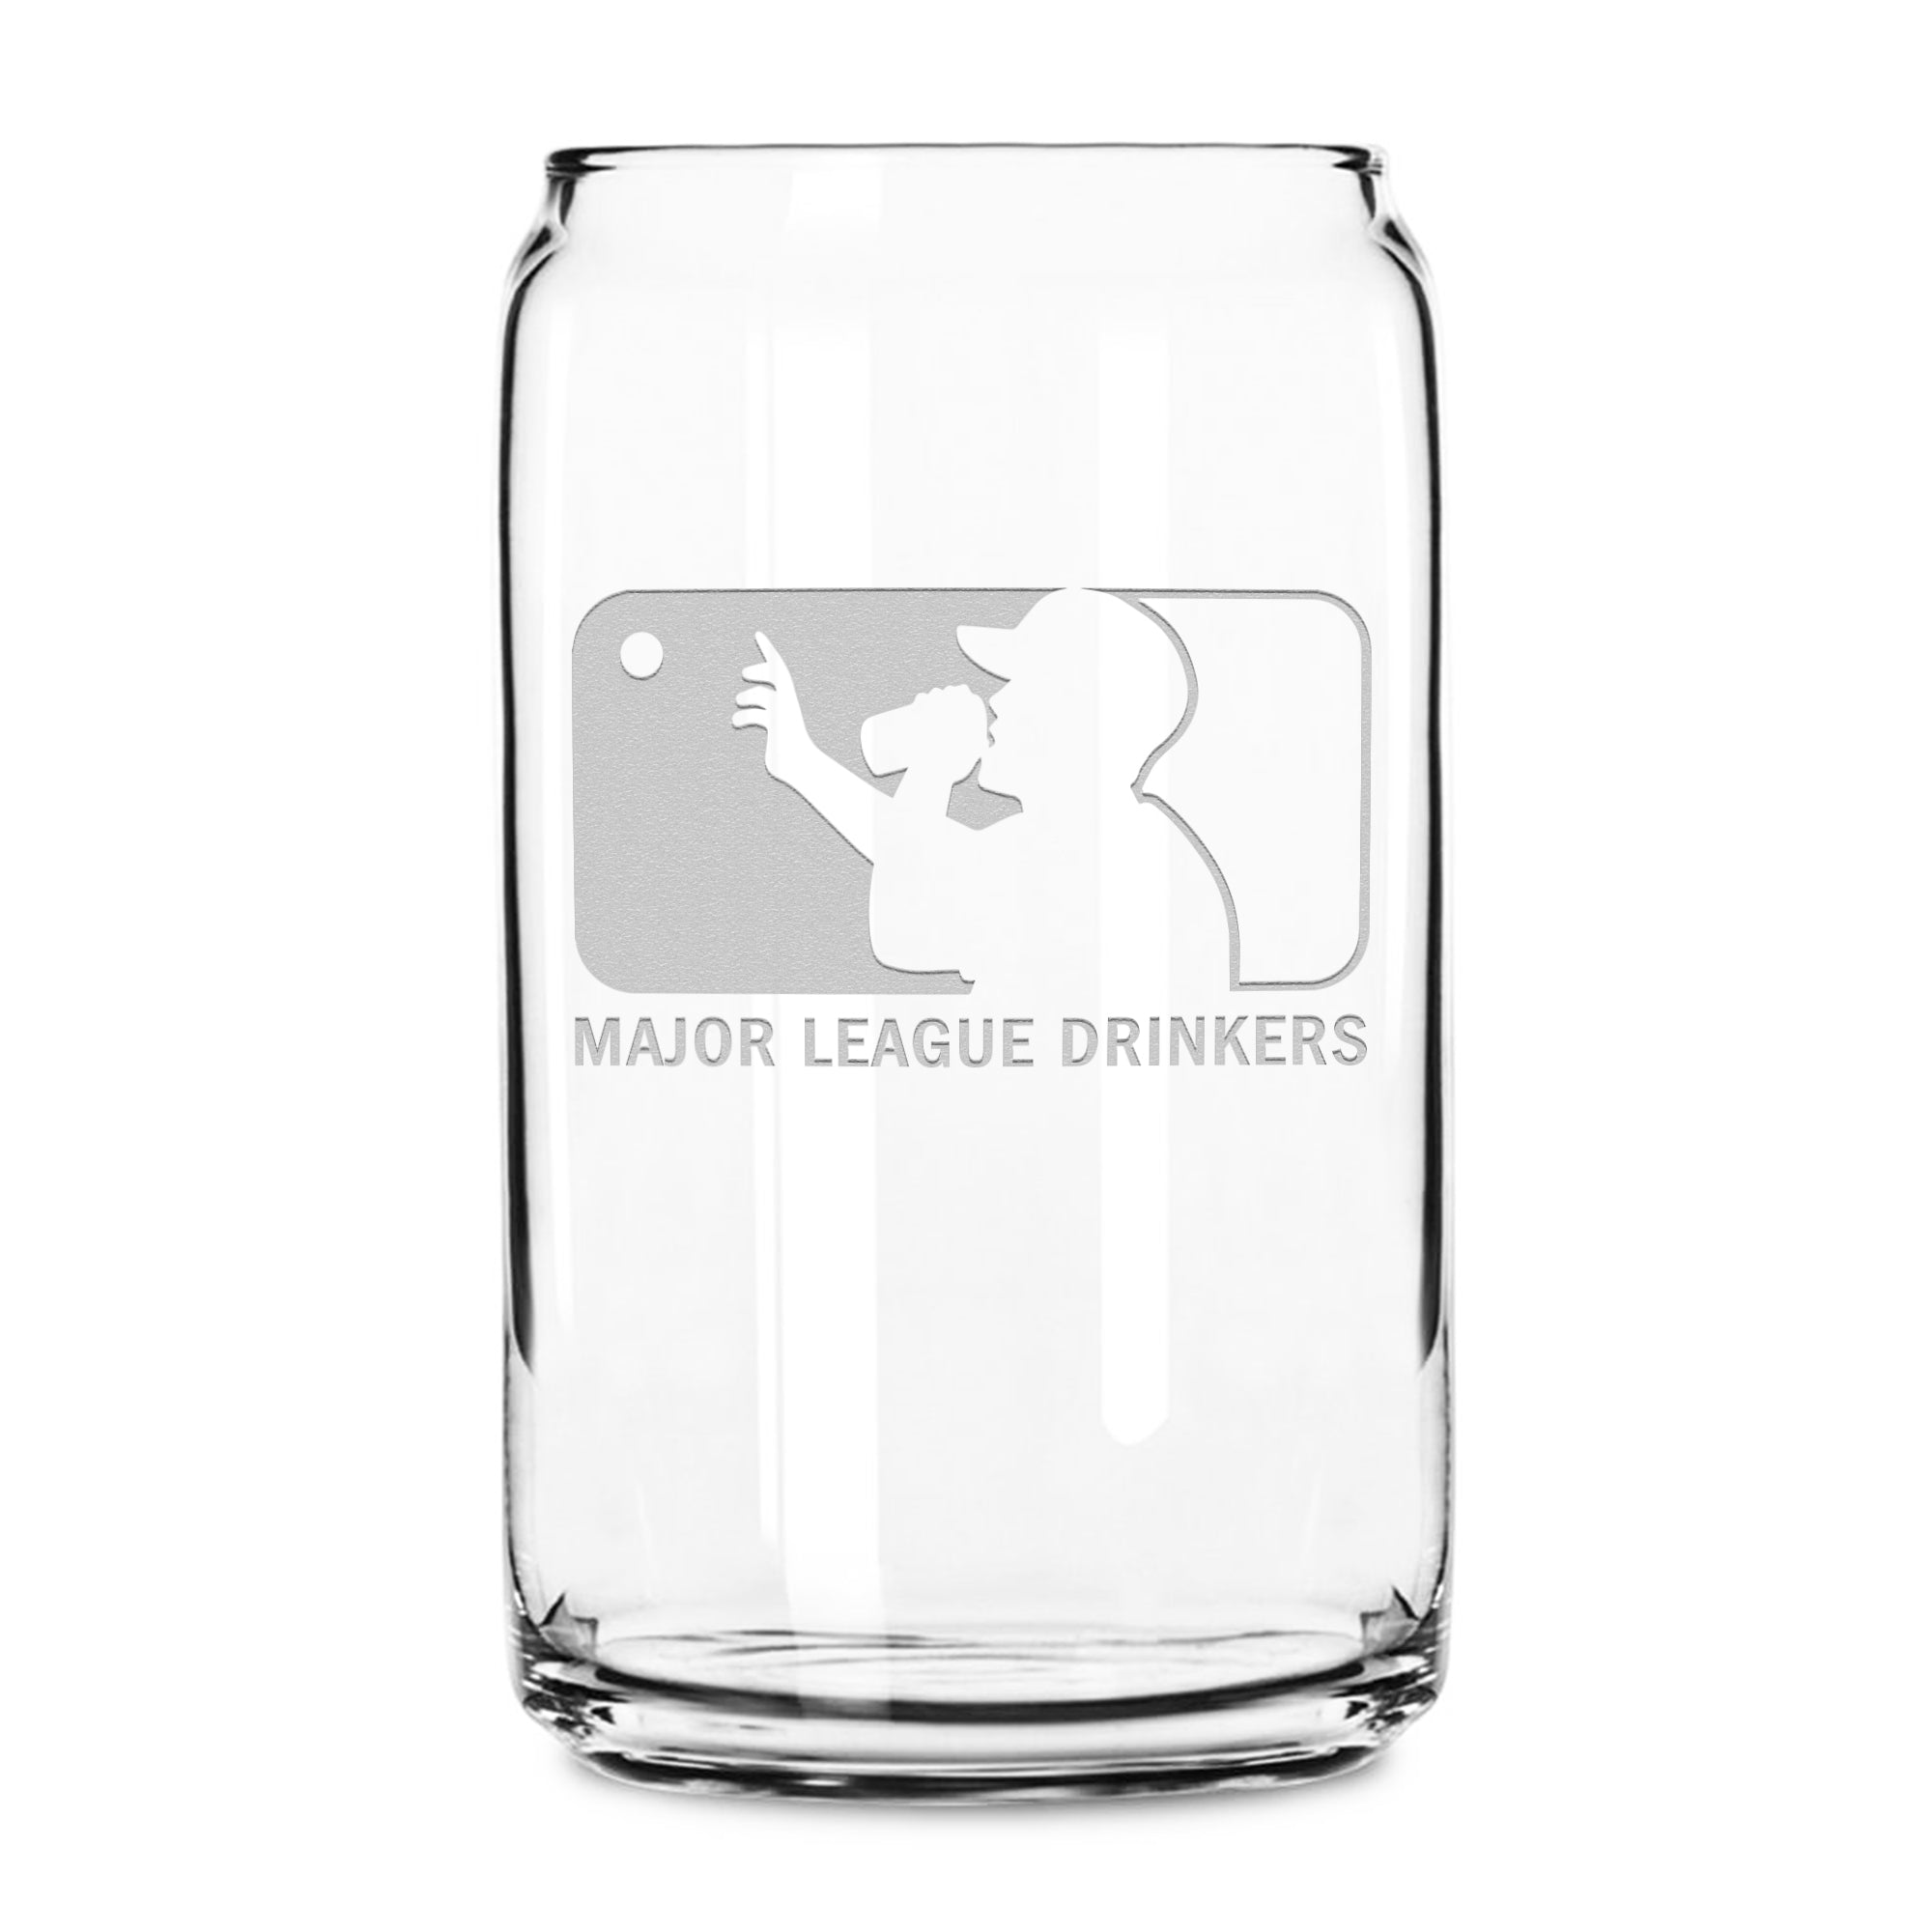 Integrity Bottles Major League Drinkers, Premium Beer Can Glass, Handmade, Handblown, Hand Etched Gifts, Sand Carved, 16oz